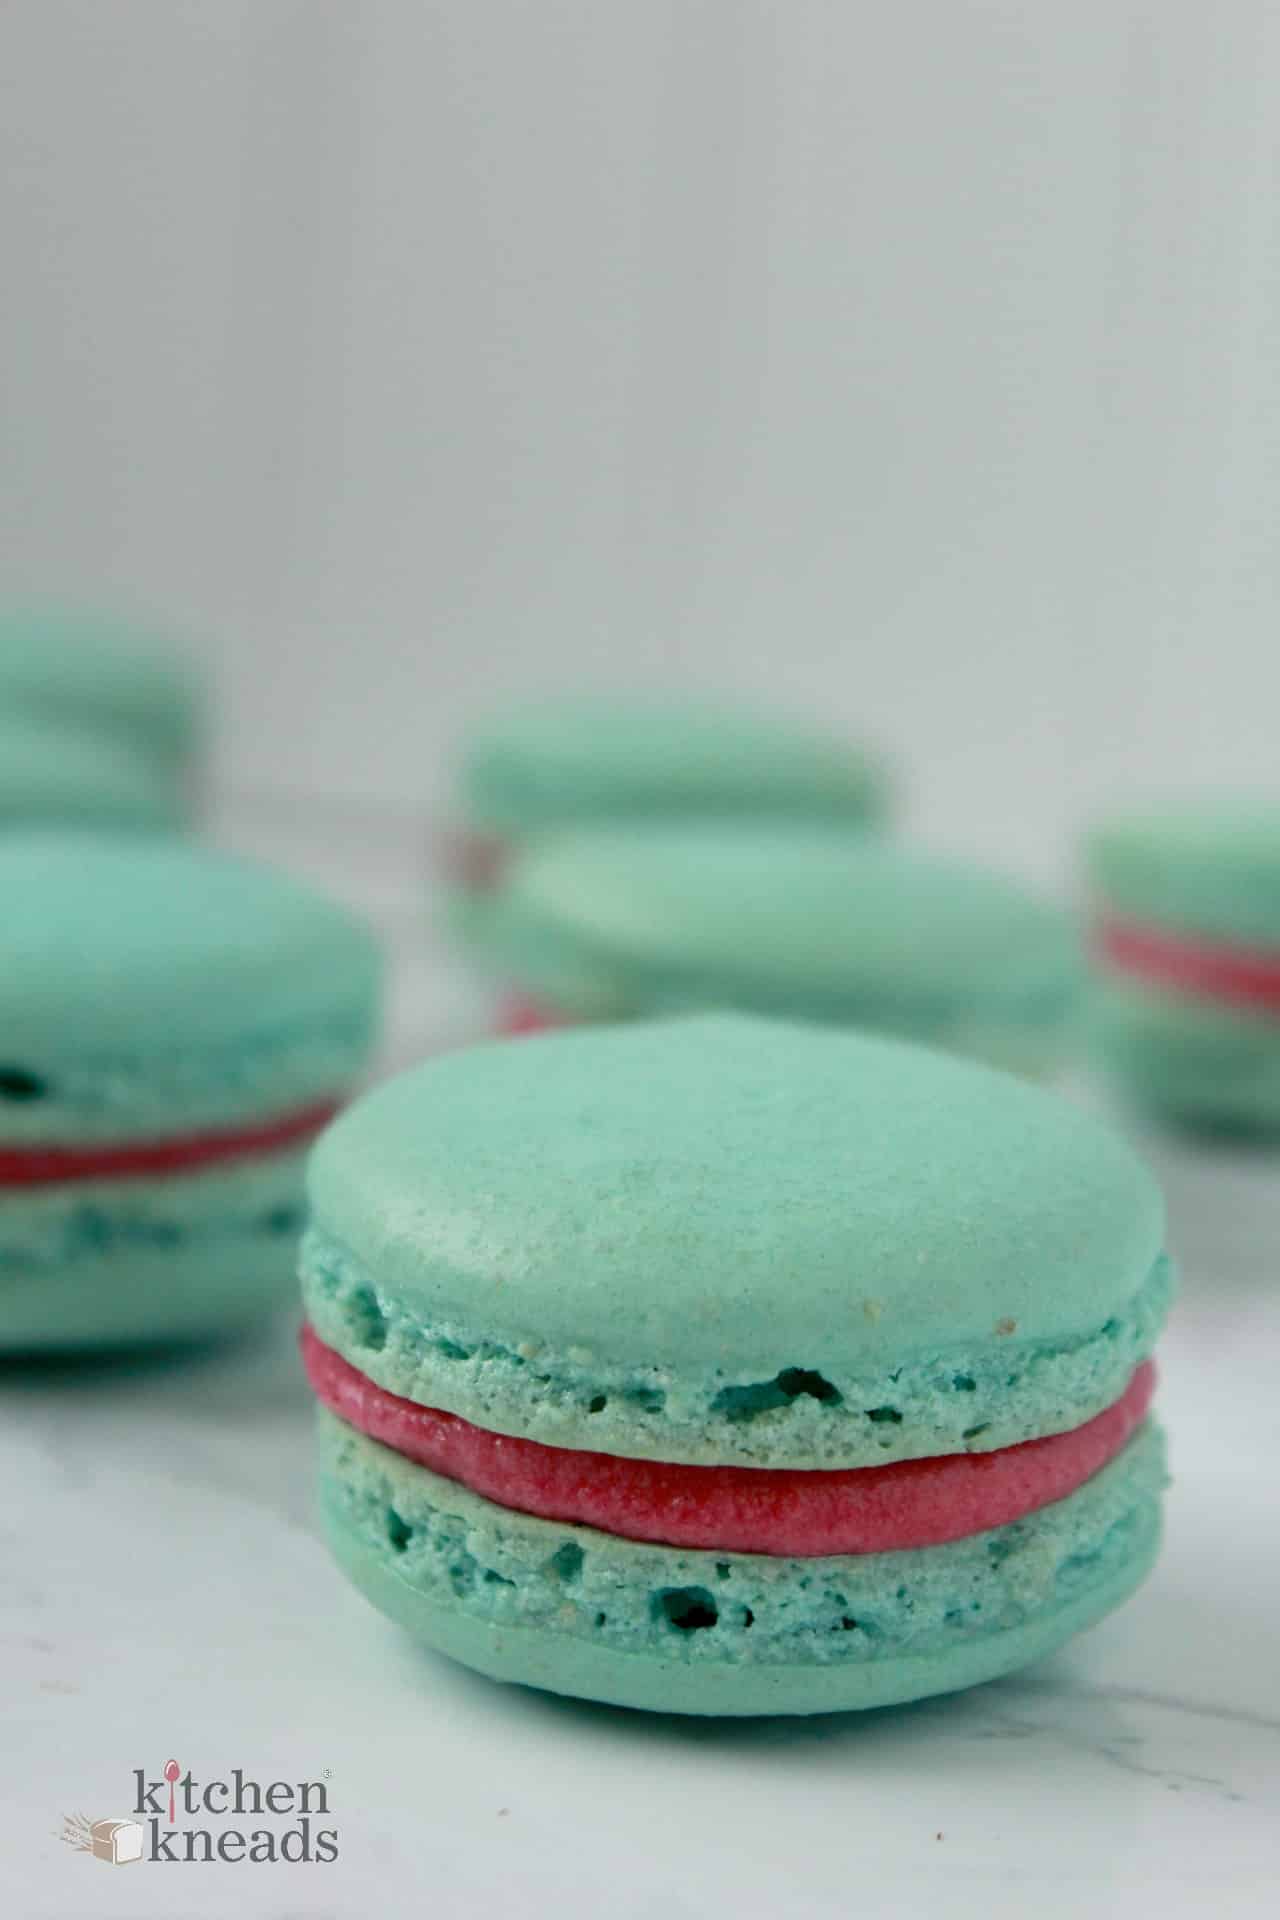 SOLD OUT ~ Hands-On Macaron Class | August 13th | Learn to Make an Amazing Macaron